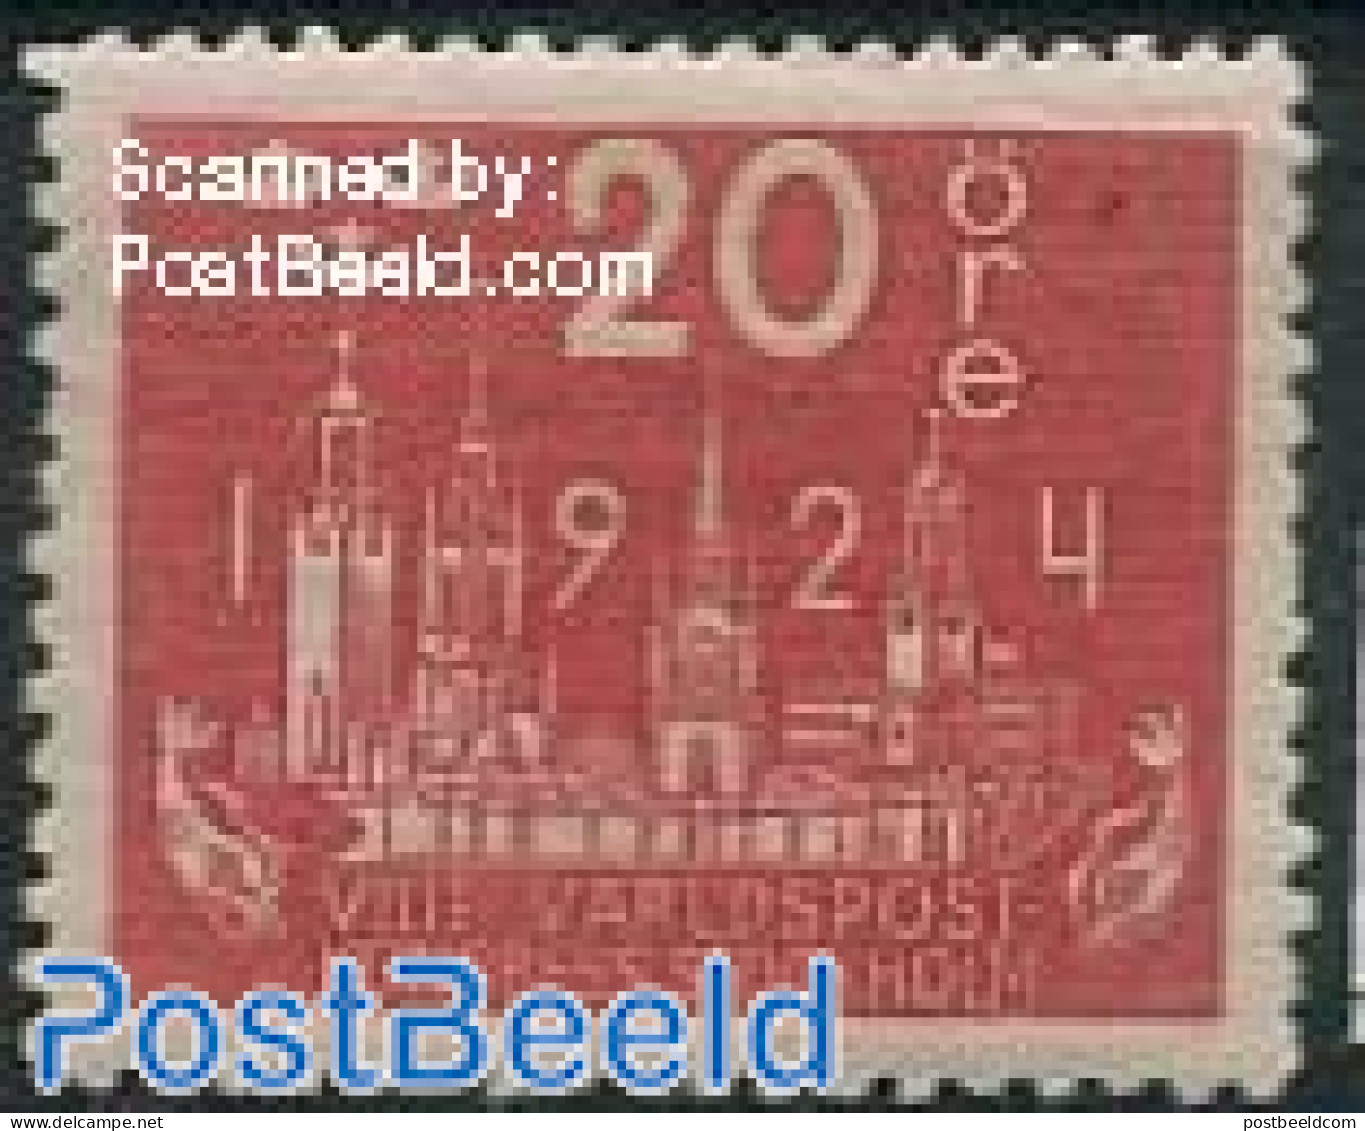 Sweden 1924 20o, Stamp Out Of Set, Unused (hinged) - Ungebraucht